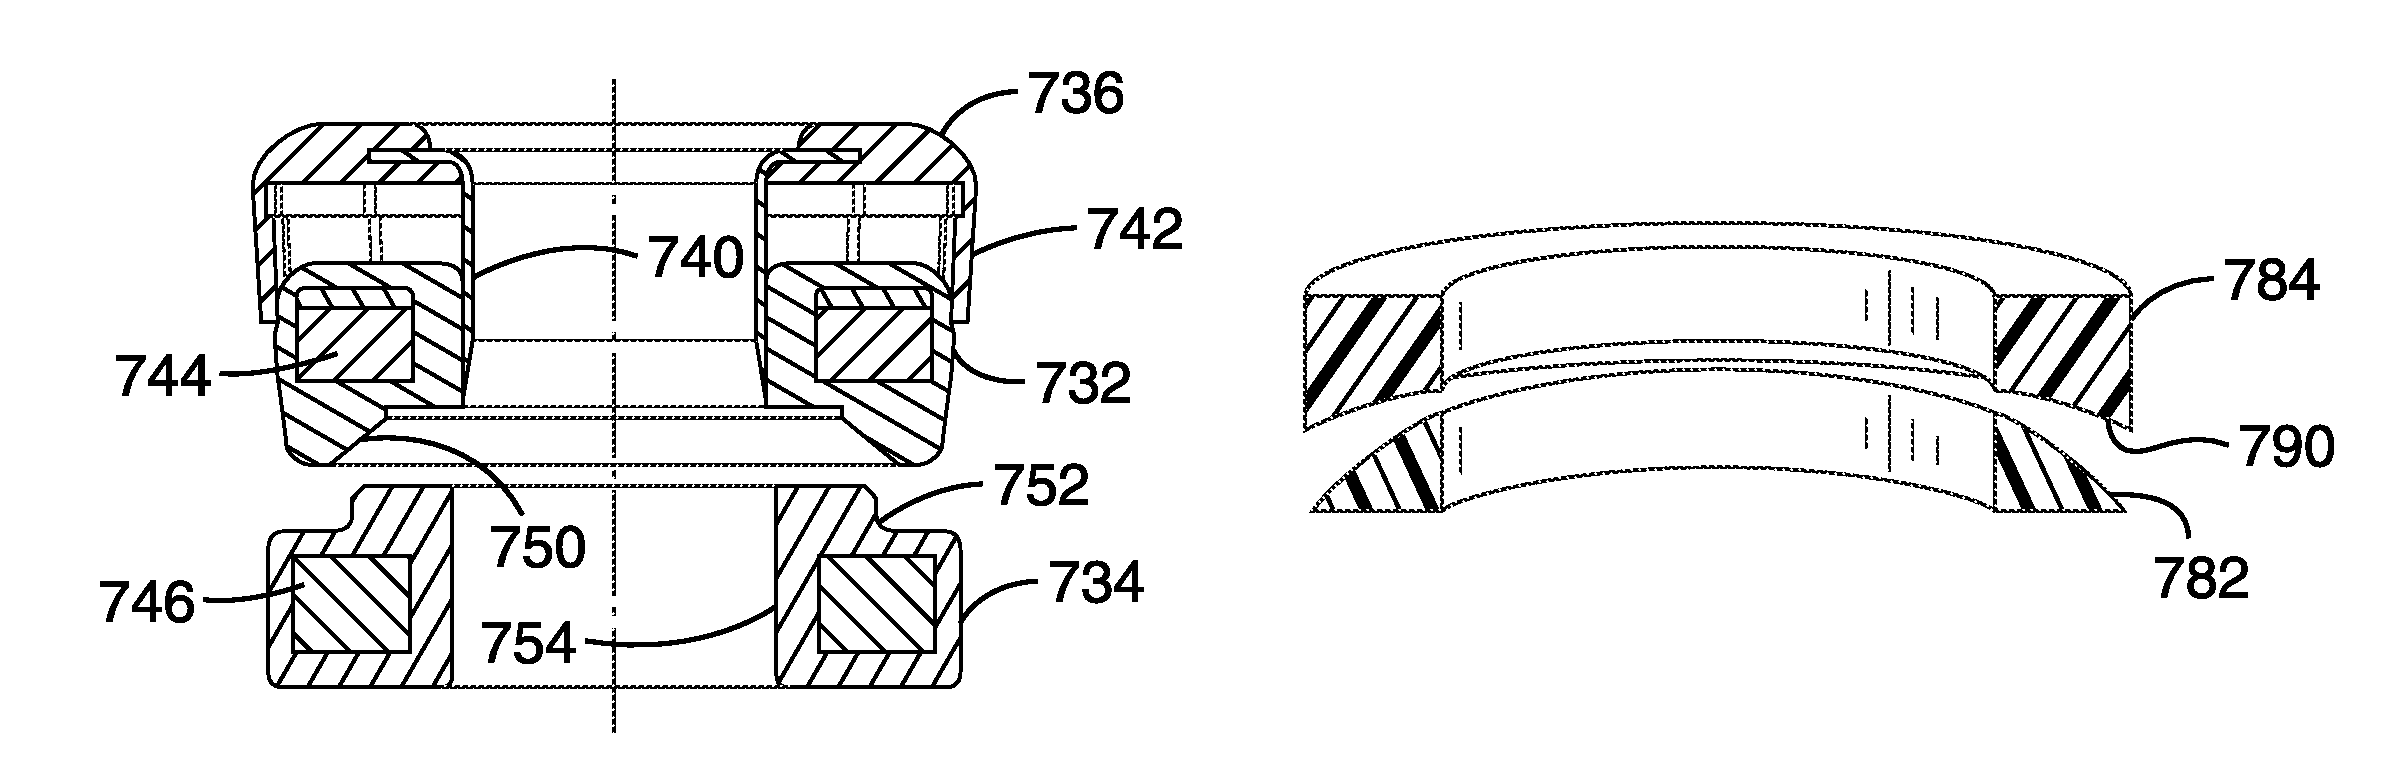 Apparatus and method for magnetic alteration of anatomical features